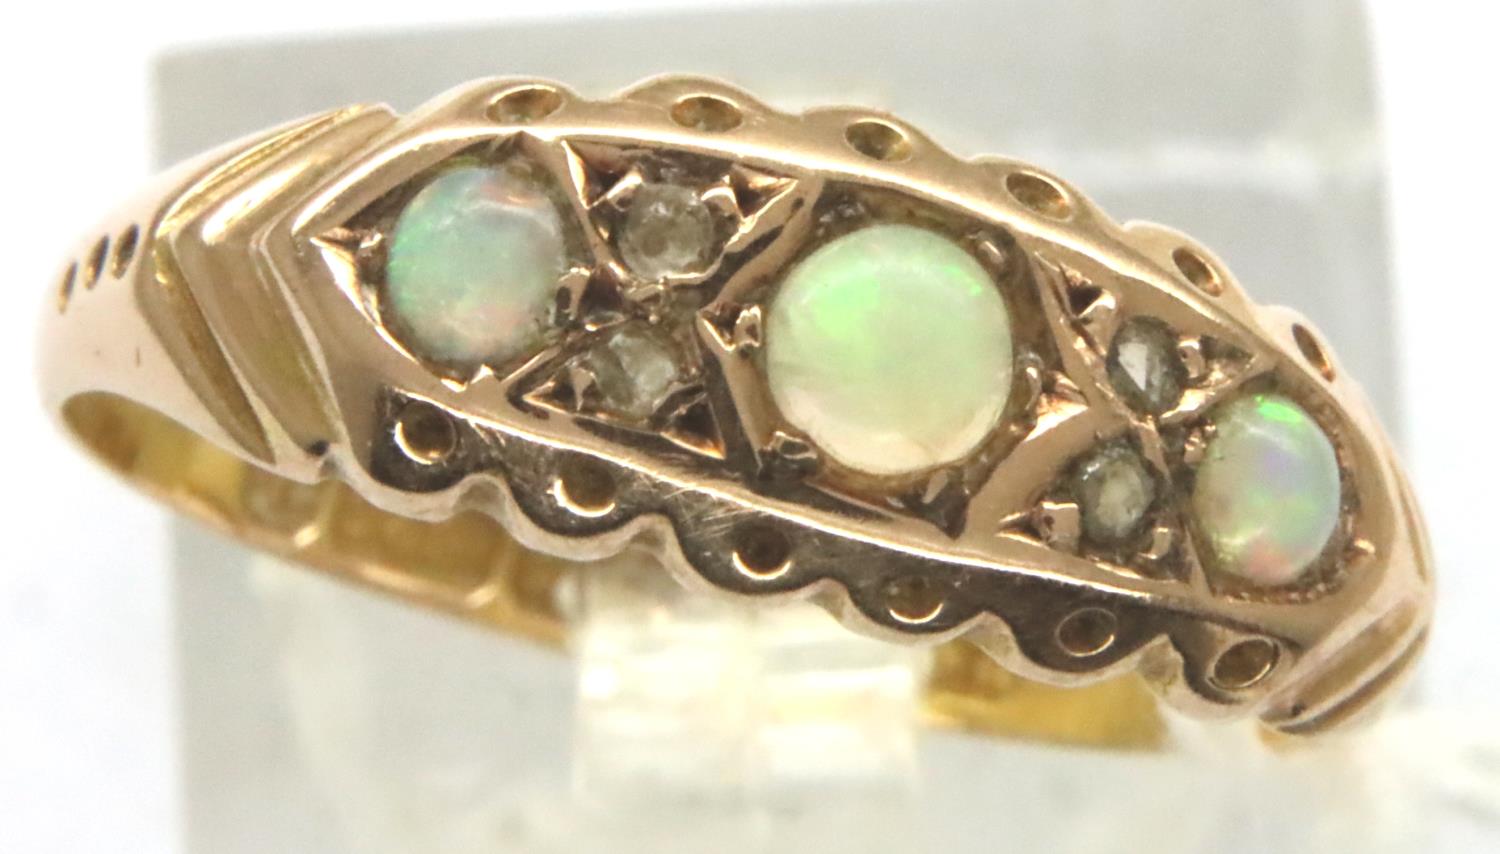 15ct gold opal set ring, size O, 1.8g. Good condition, hallmarks clear, no visible damage, ring is